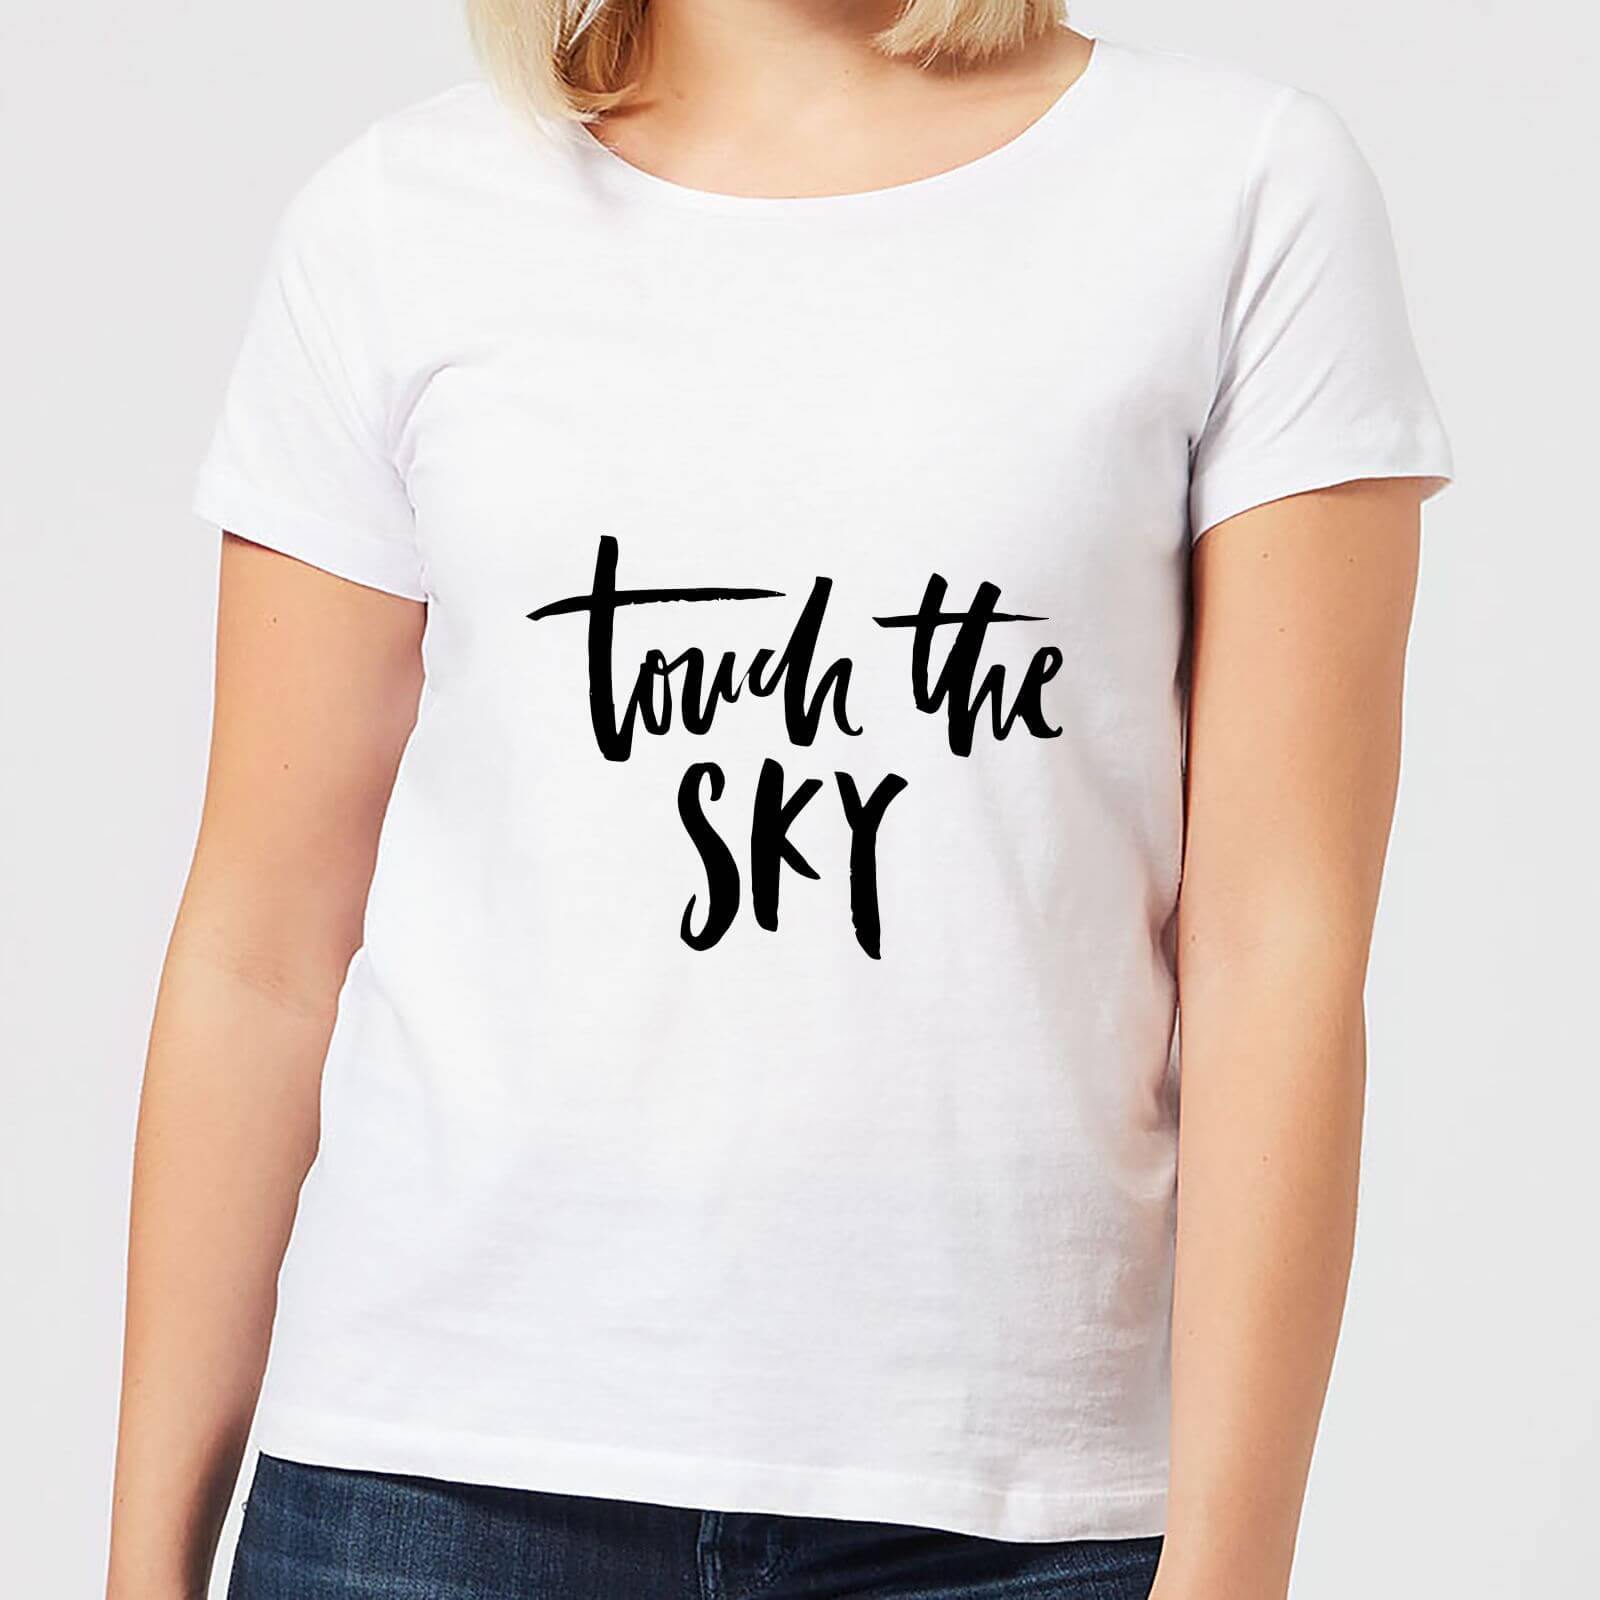 Touch The Sky Women's T-Shirt - White - S